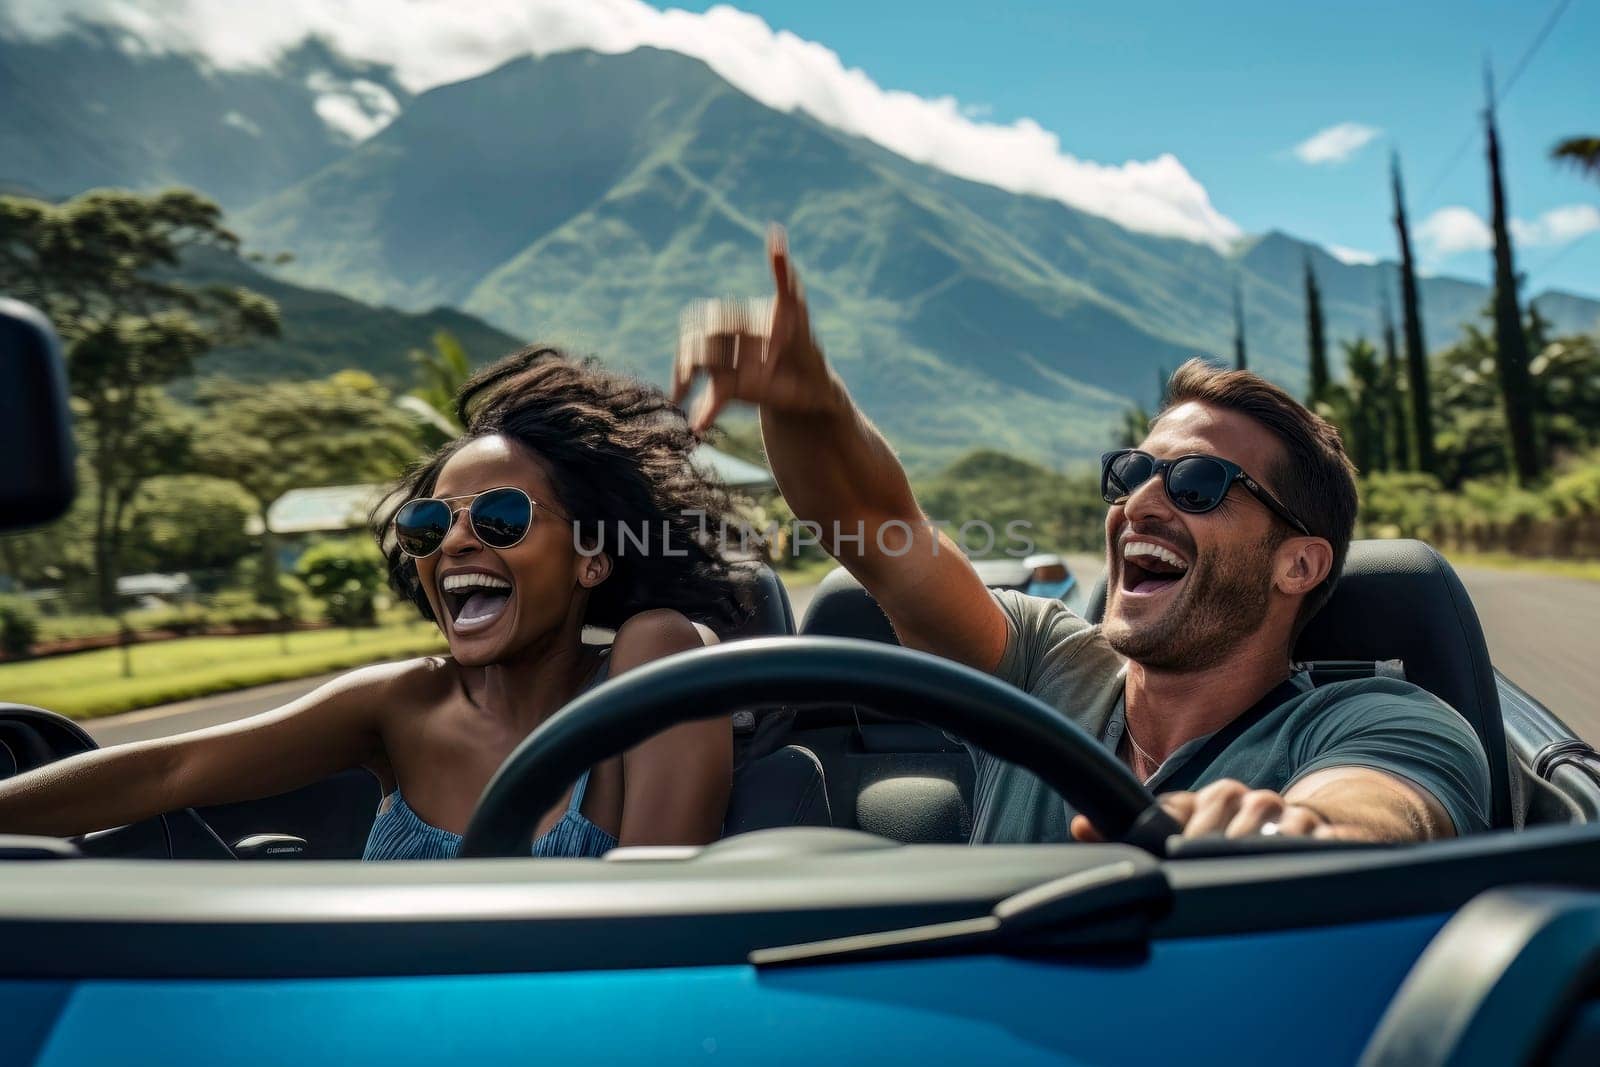 A delightful image capturing a happy couple driving a convertible car on a road trip, enjoying their holiday.